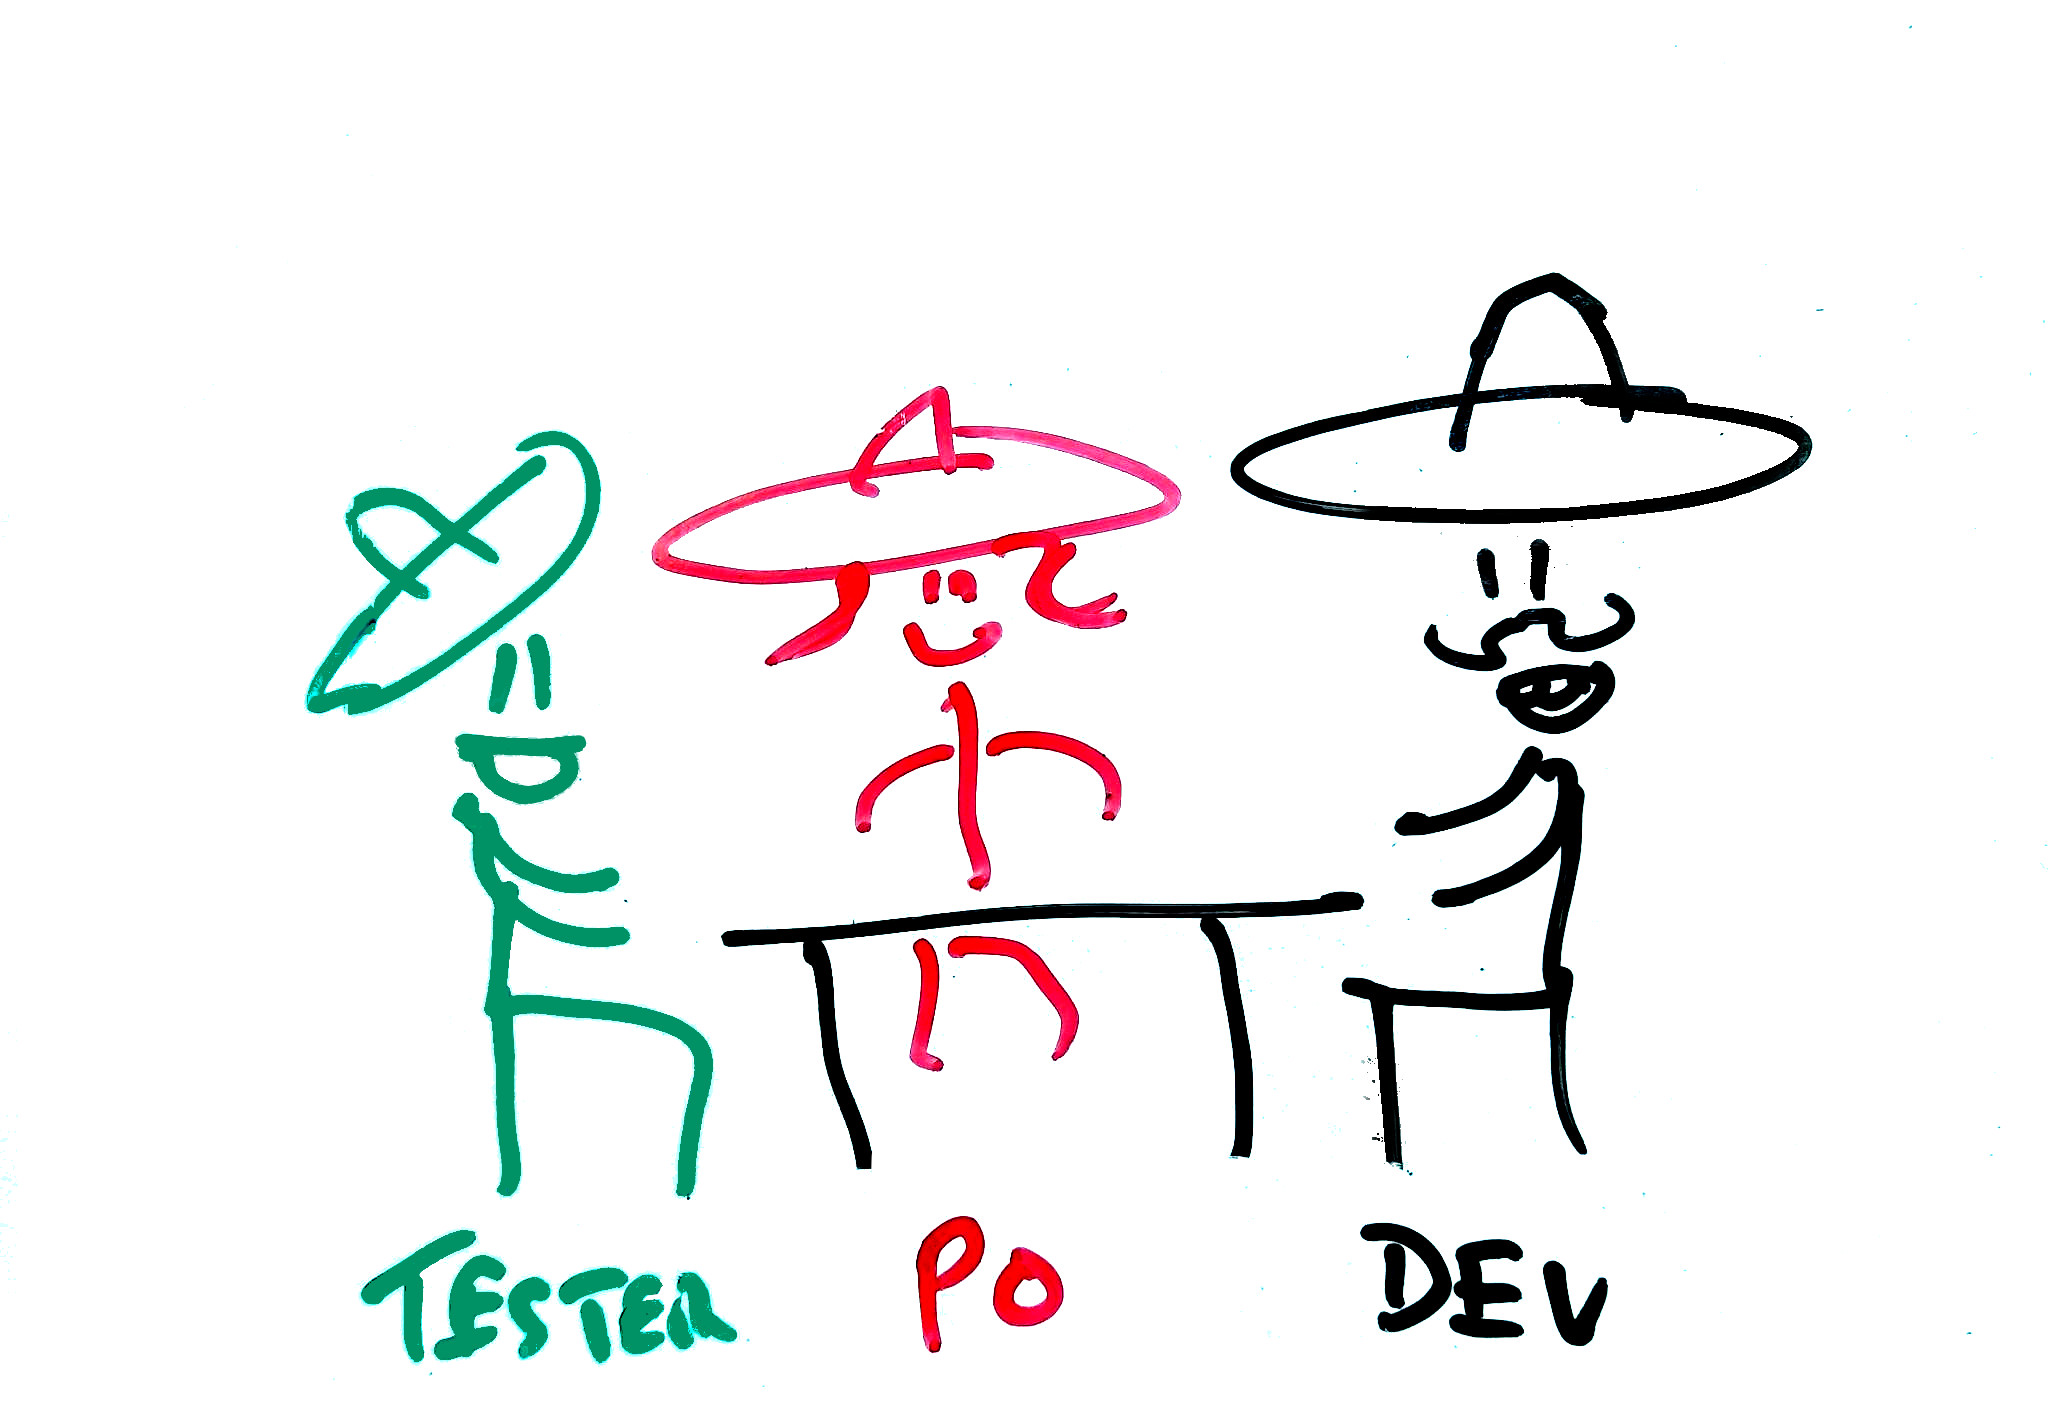 Drawing : 3 Amigos. An informal meeting between Business Tester and Developper to define a feature by discovering concrete examples and dataset to verify them.